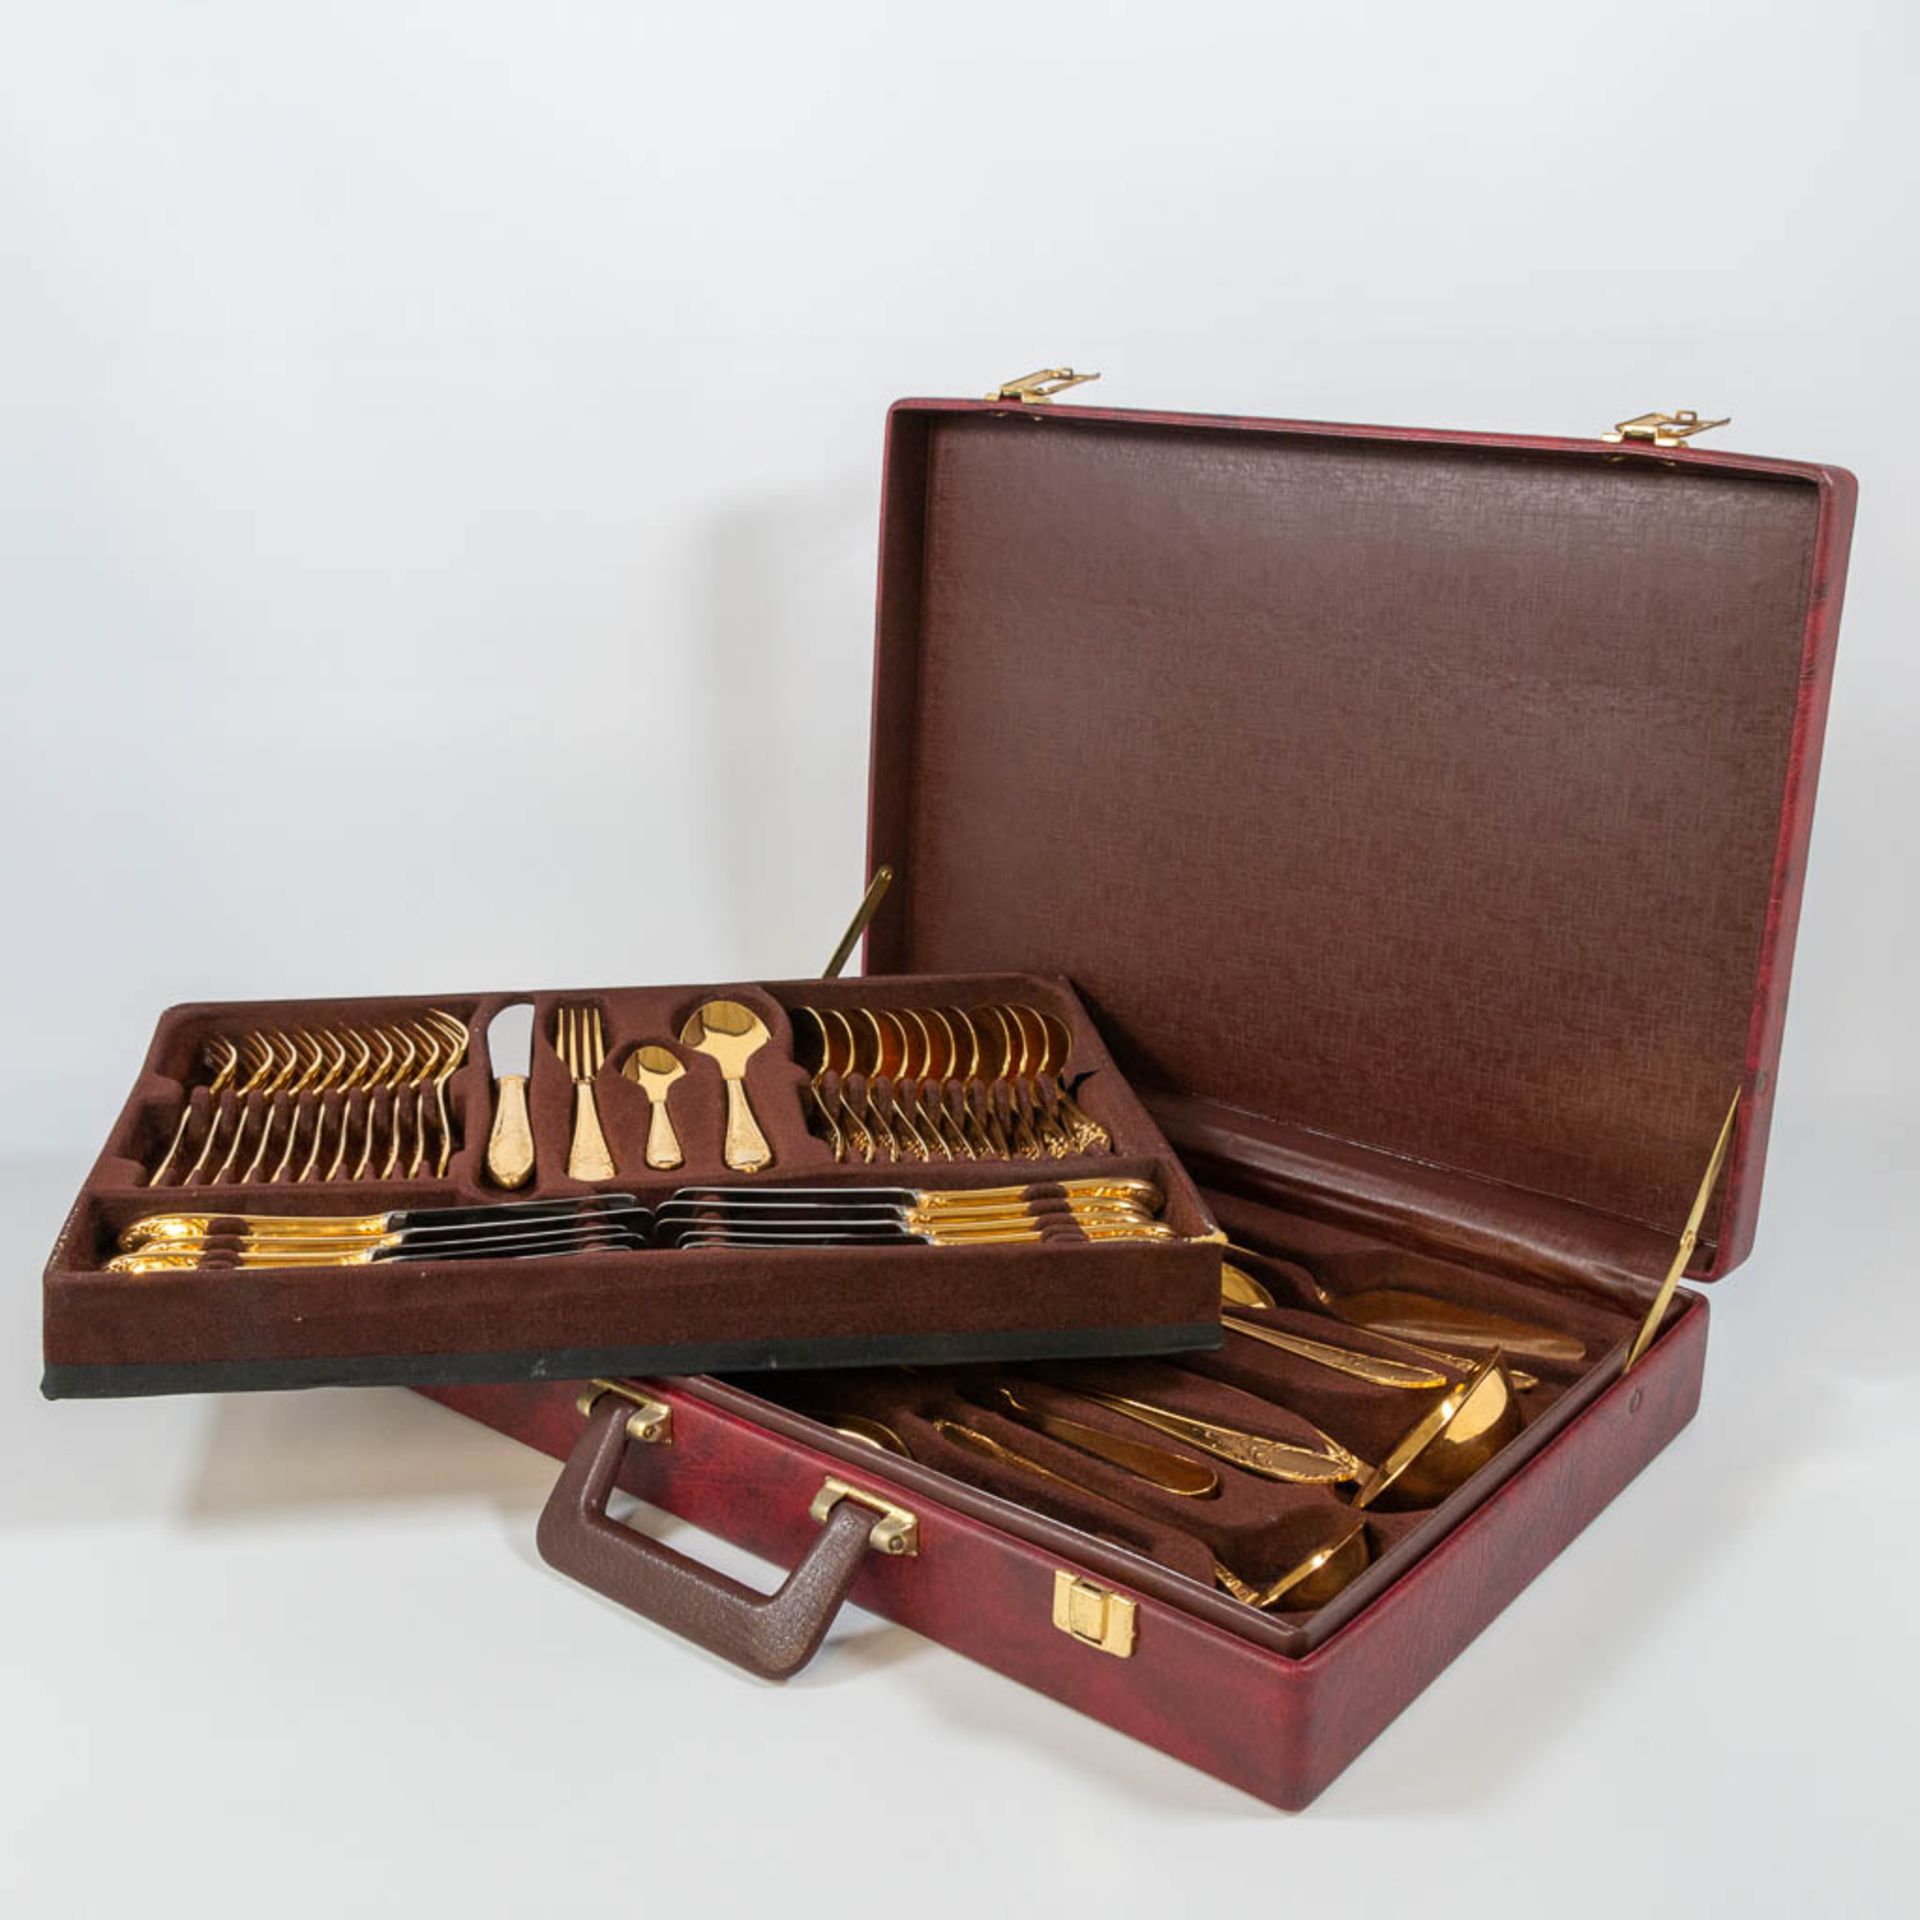 A gold-plated cuttlery set, made by Solingen in Germany. Inox 18/10 gold-plated 23 karat. - Bild 7 aus 23